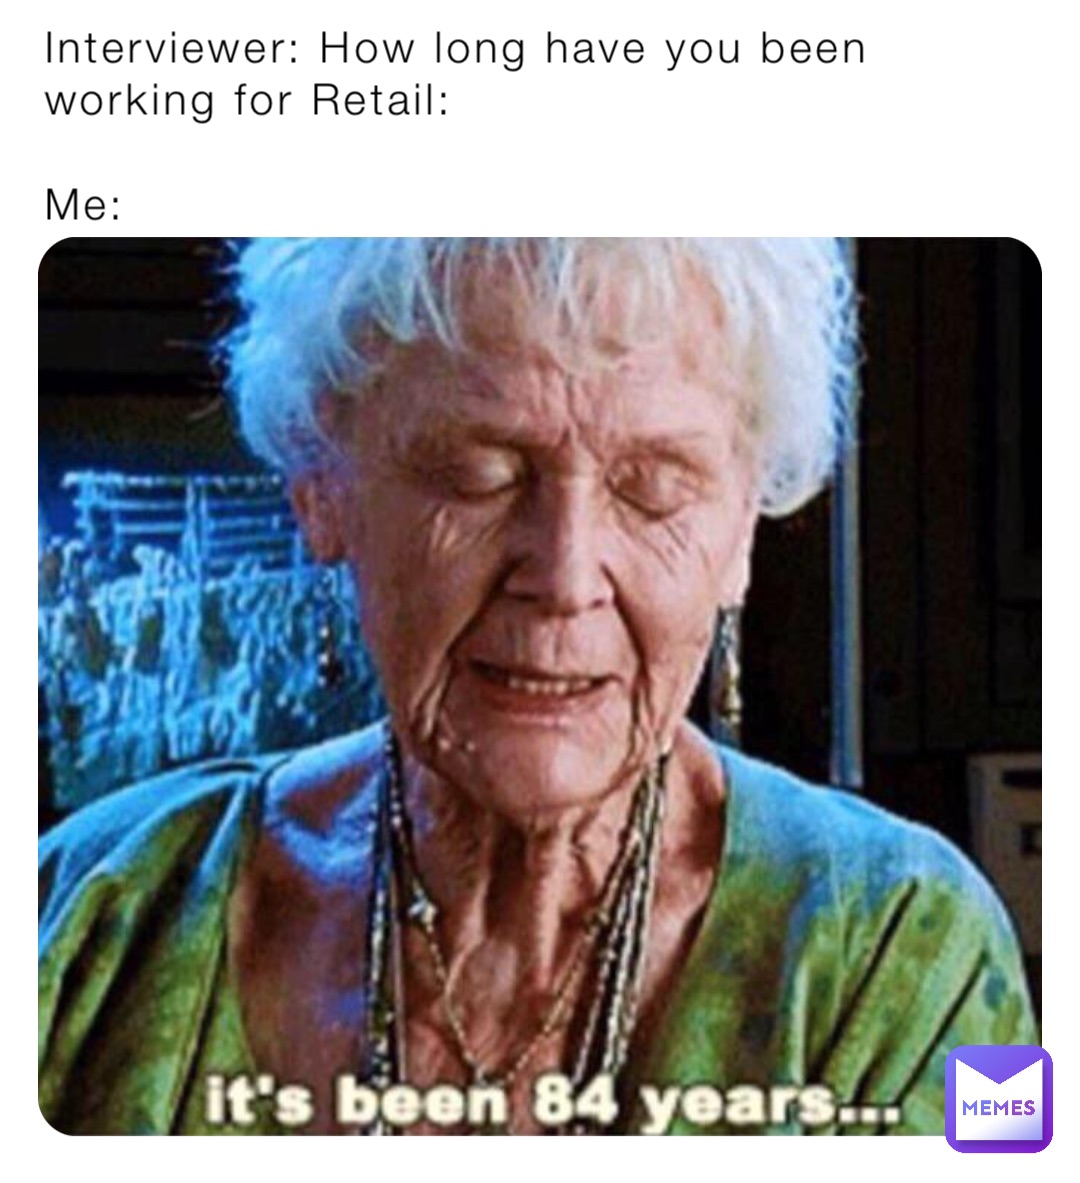 Interviewer: How long have you been working for Retail:

Me: